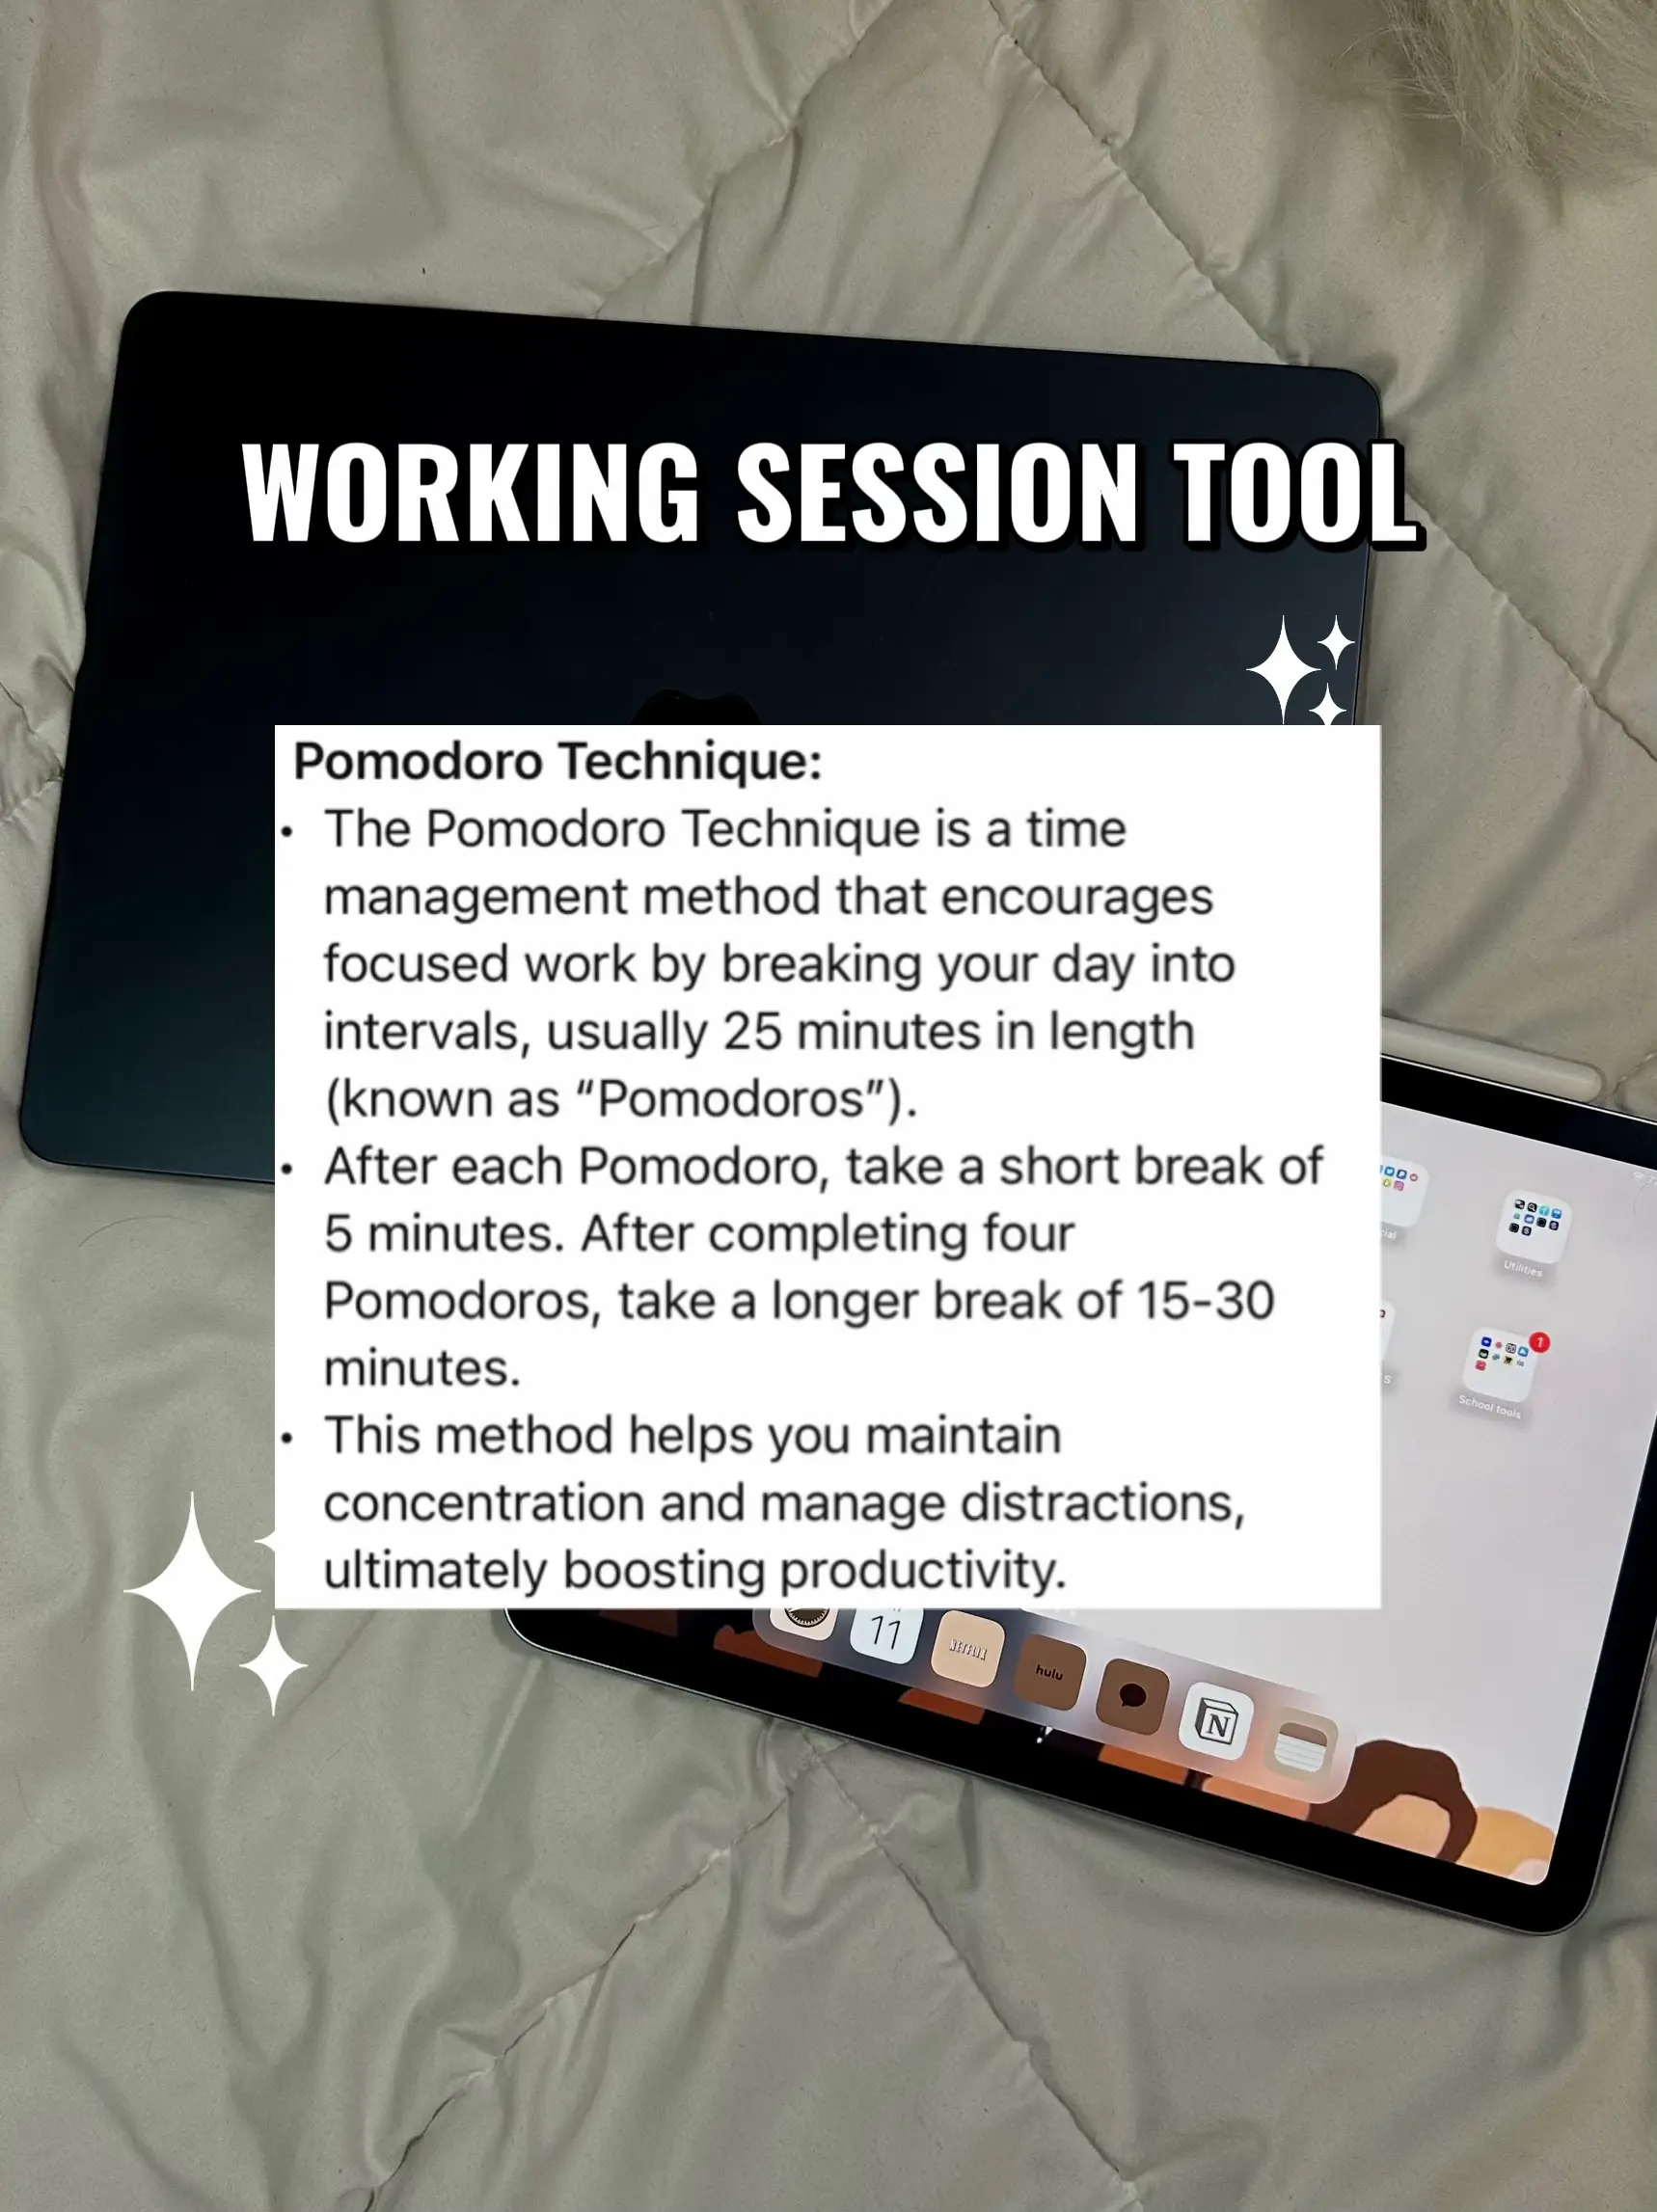 Schedule Your Day with The Pomodoro Technique